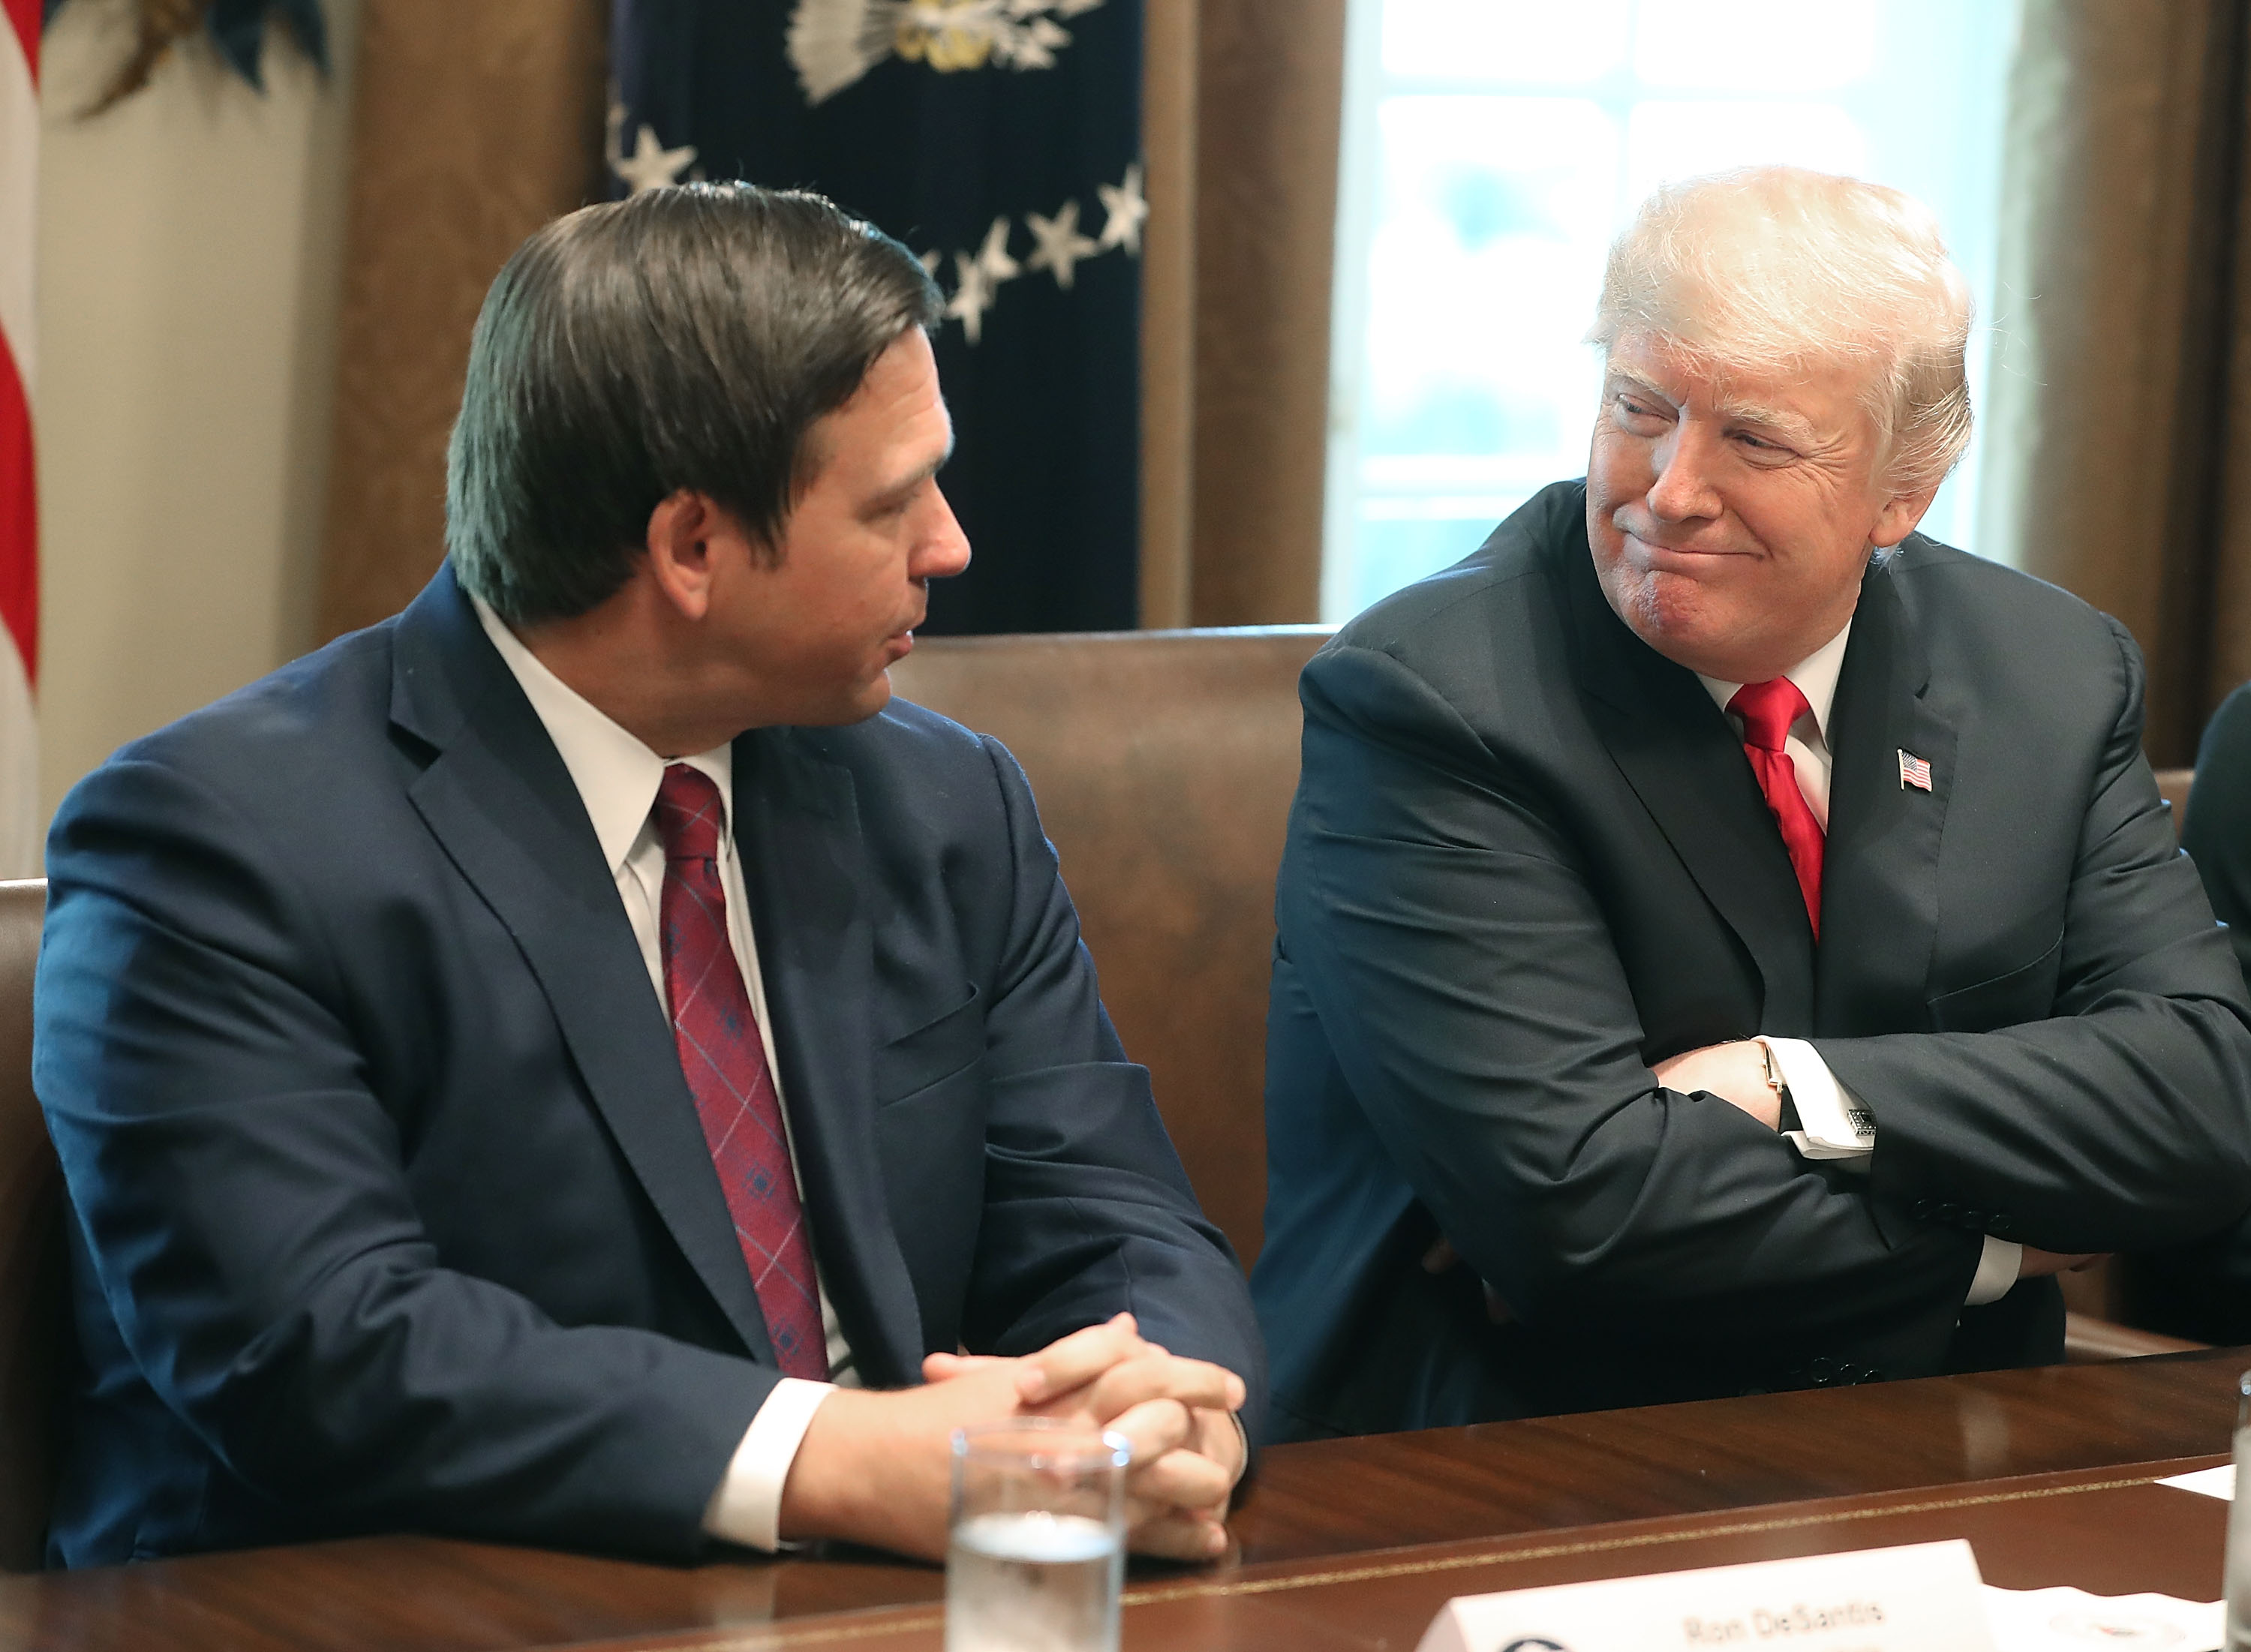 Donald Trump Blows Ron DeSantis Out of the Water in 2024 Presidential